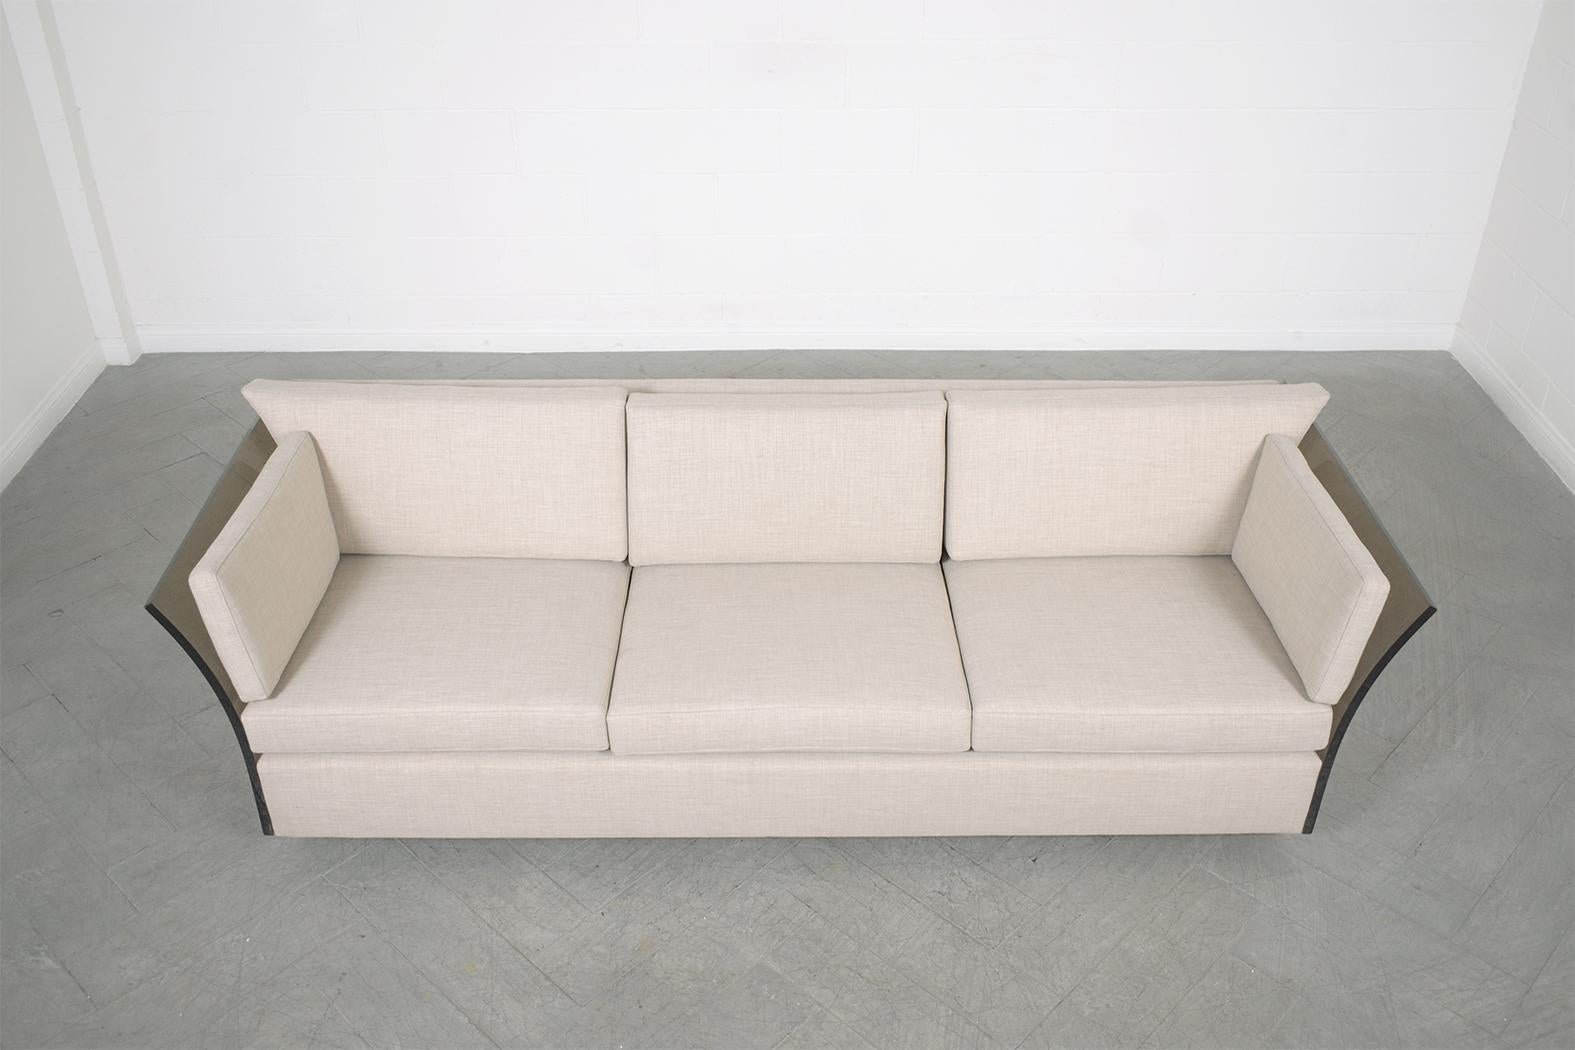 Discover the extraordinary charm of this 1960s Milo Baughman sofa. Immaculately restored by our team of expert craftsmen, this solid wood and lucite combination sofa promises unparalleled comfort and style. It boasts three plush foam seats and back